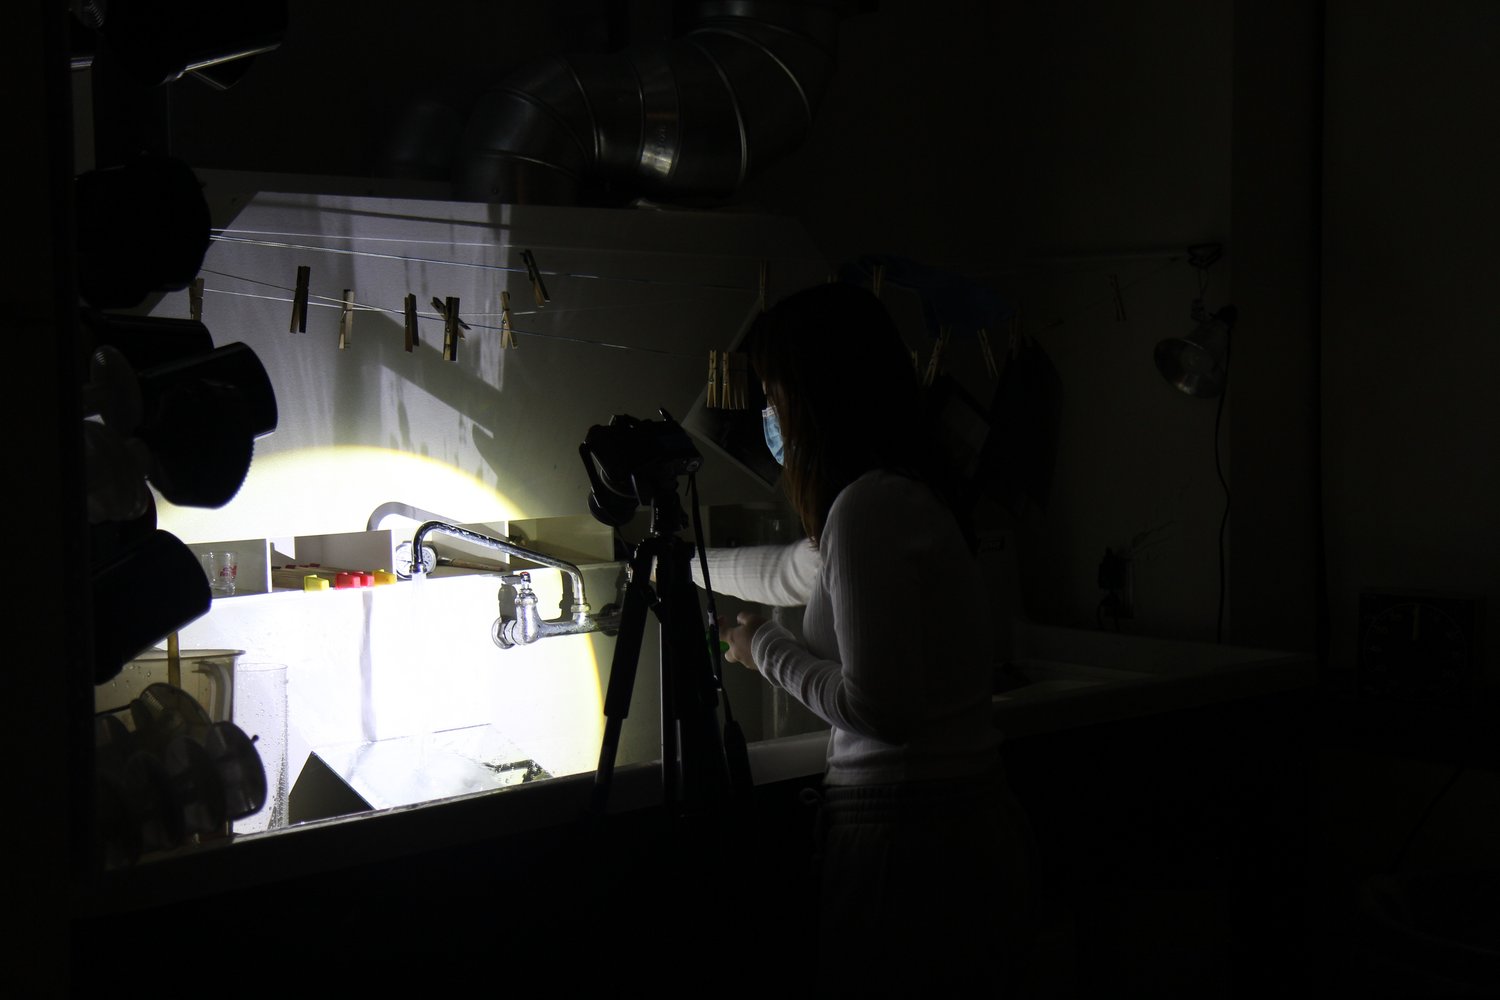 Photography Darkroom, student experimenting with developing using directed light.